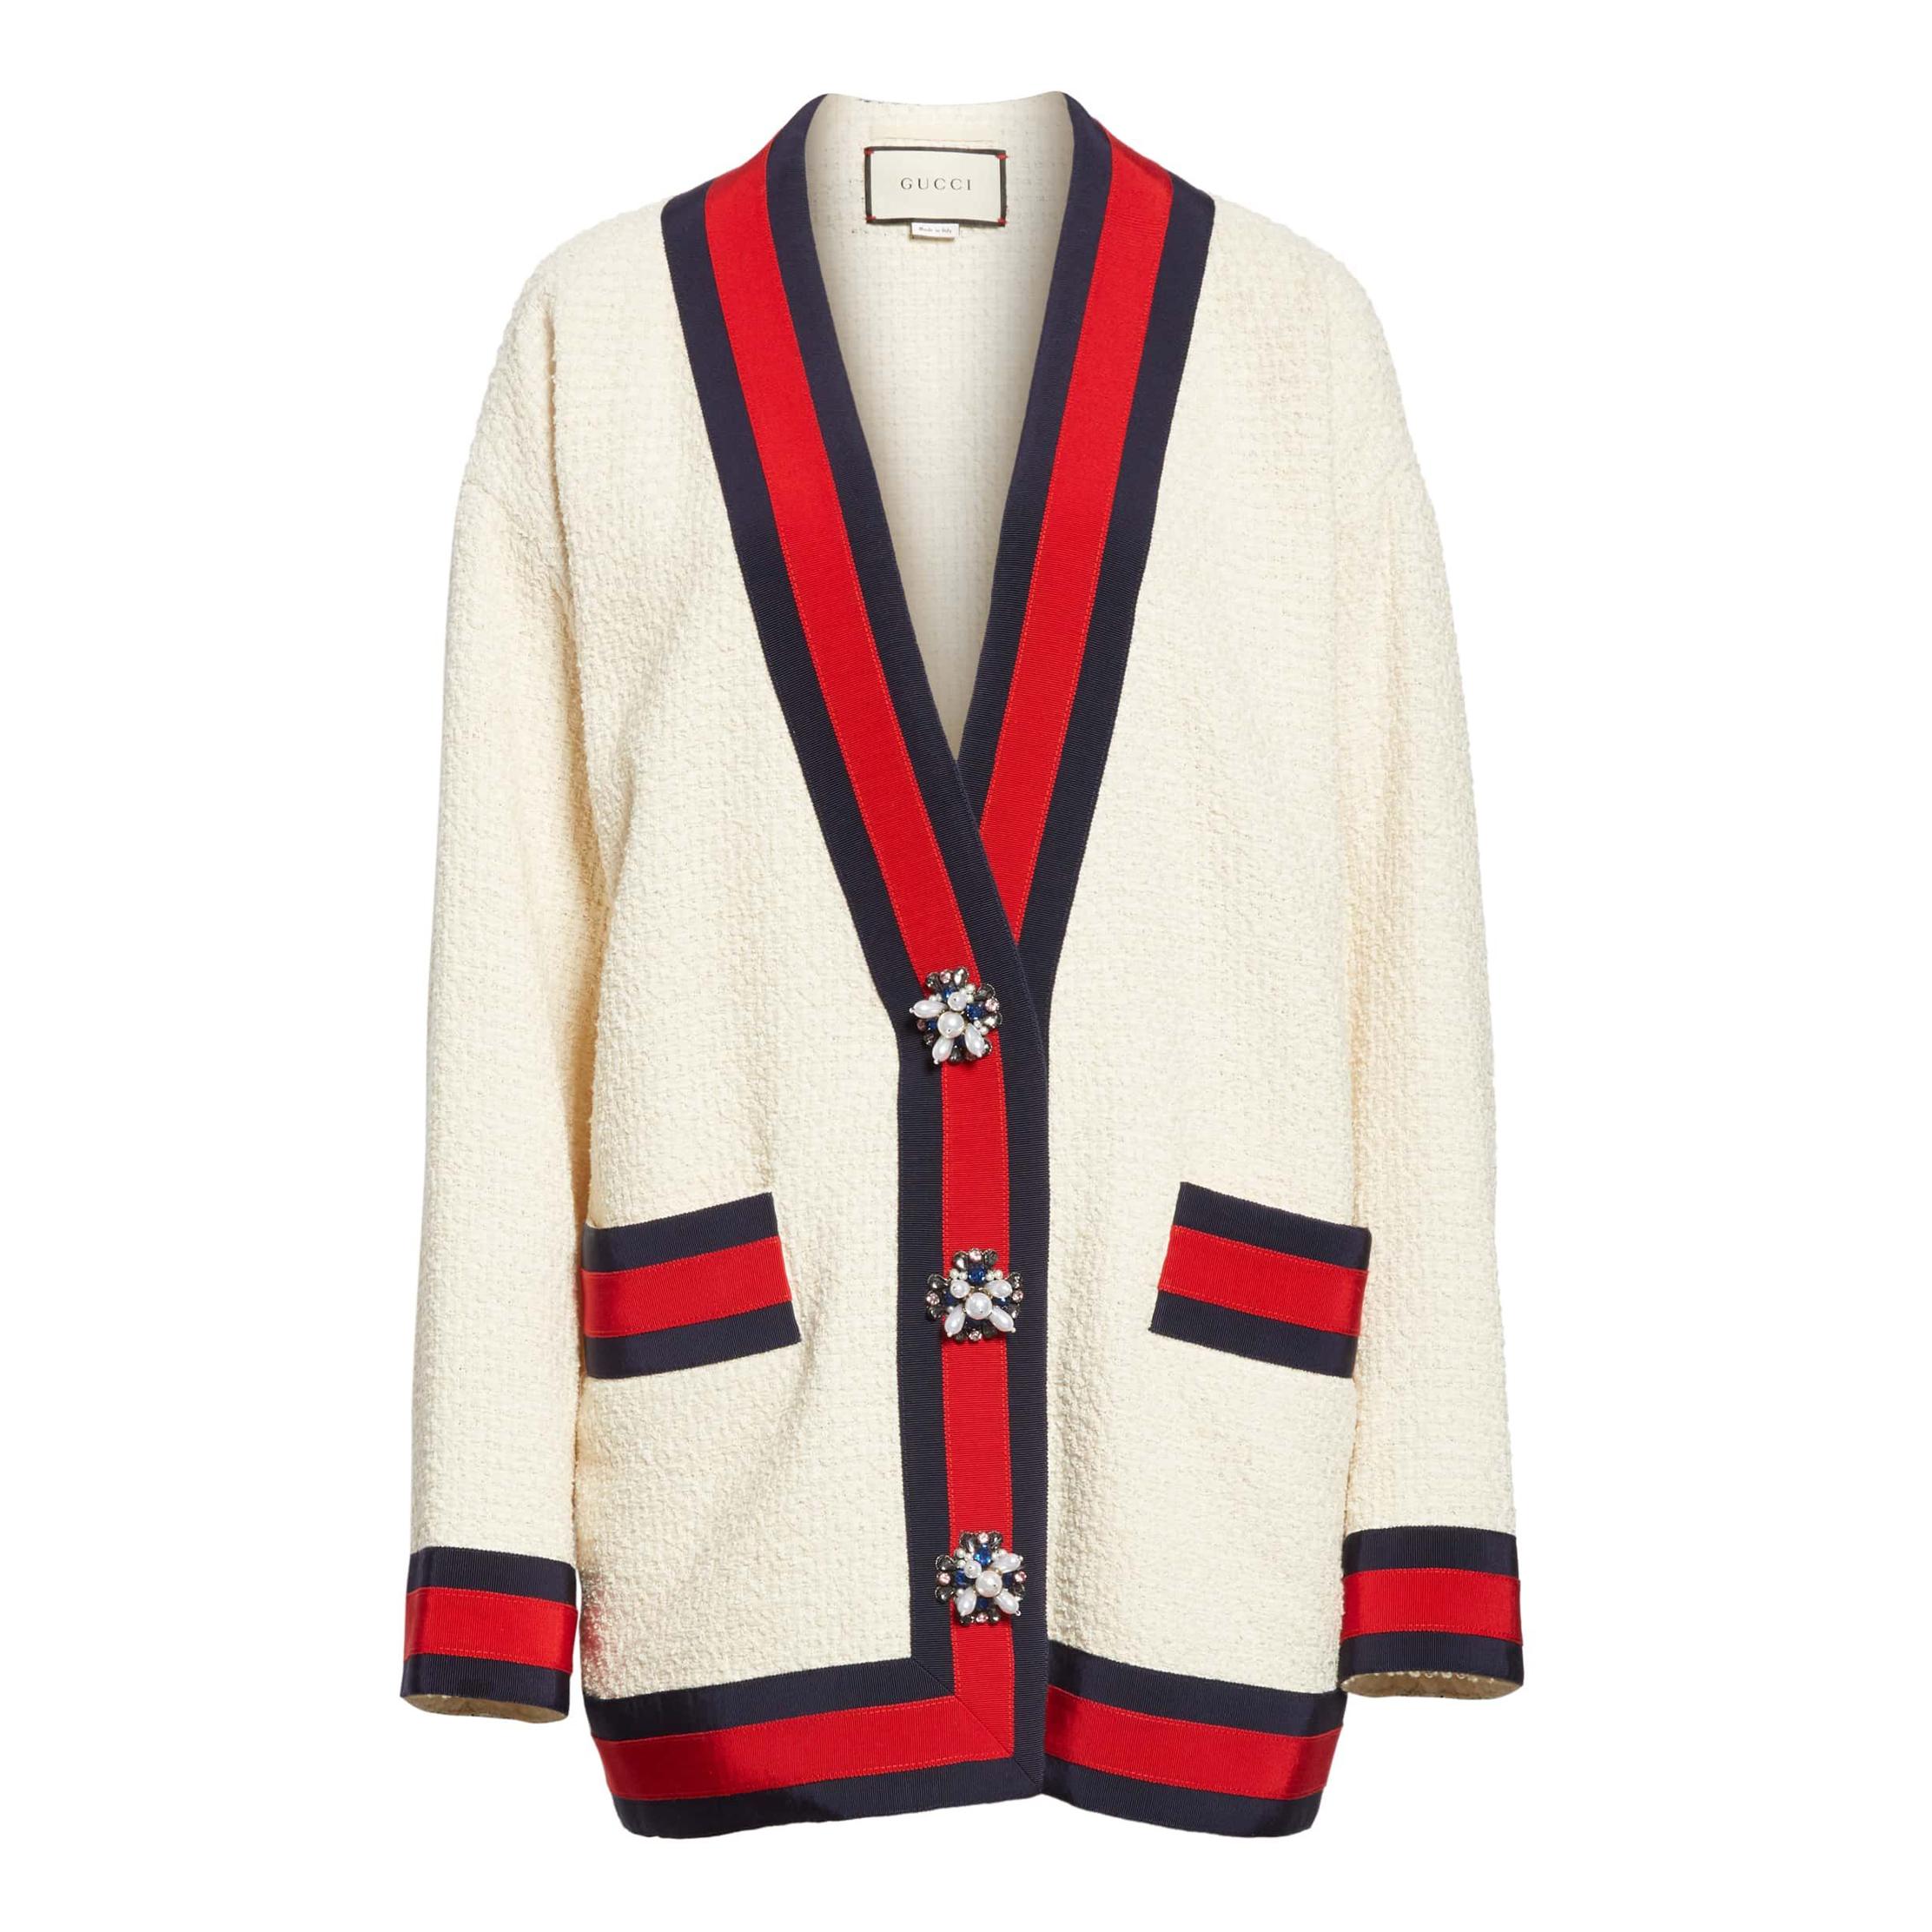 GUCCI off-white cotton Oversized Boucle Cardigan Sweater 40 S